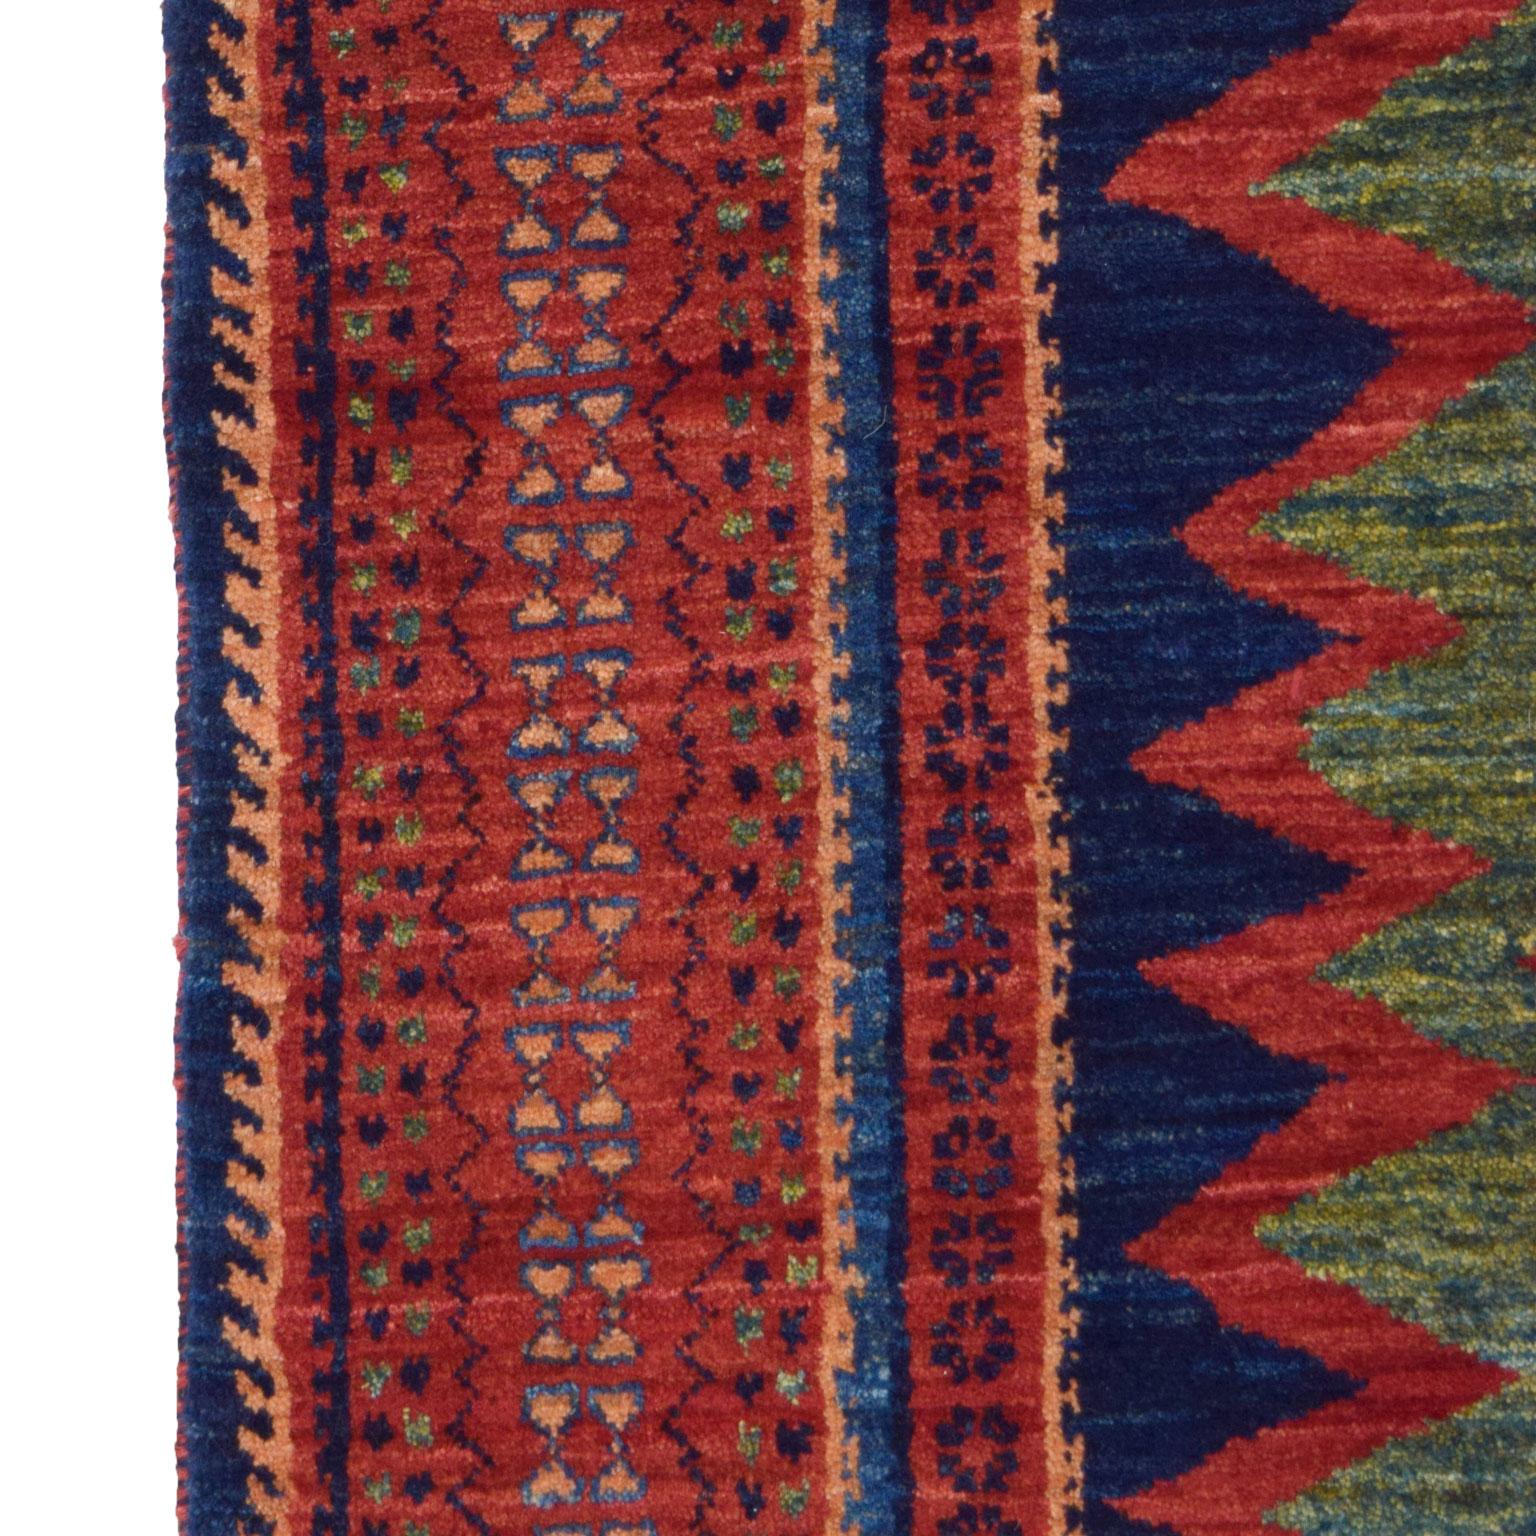 Hand-Knotted Wool Persian Qashqai Tribal Rug, Red, Green, Indigo, Cream, 4’ x 6’ For Sale 3